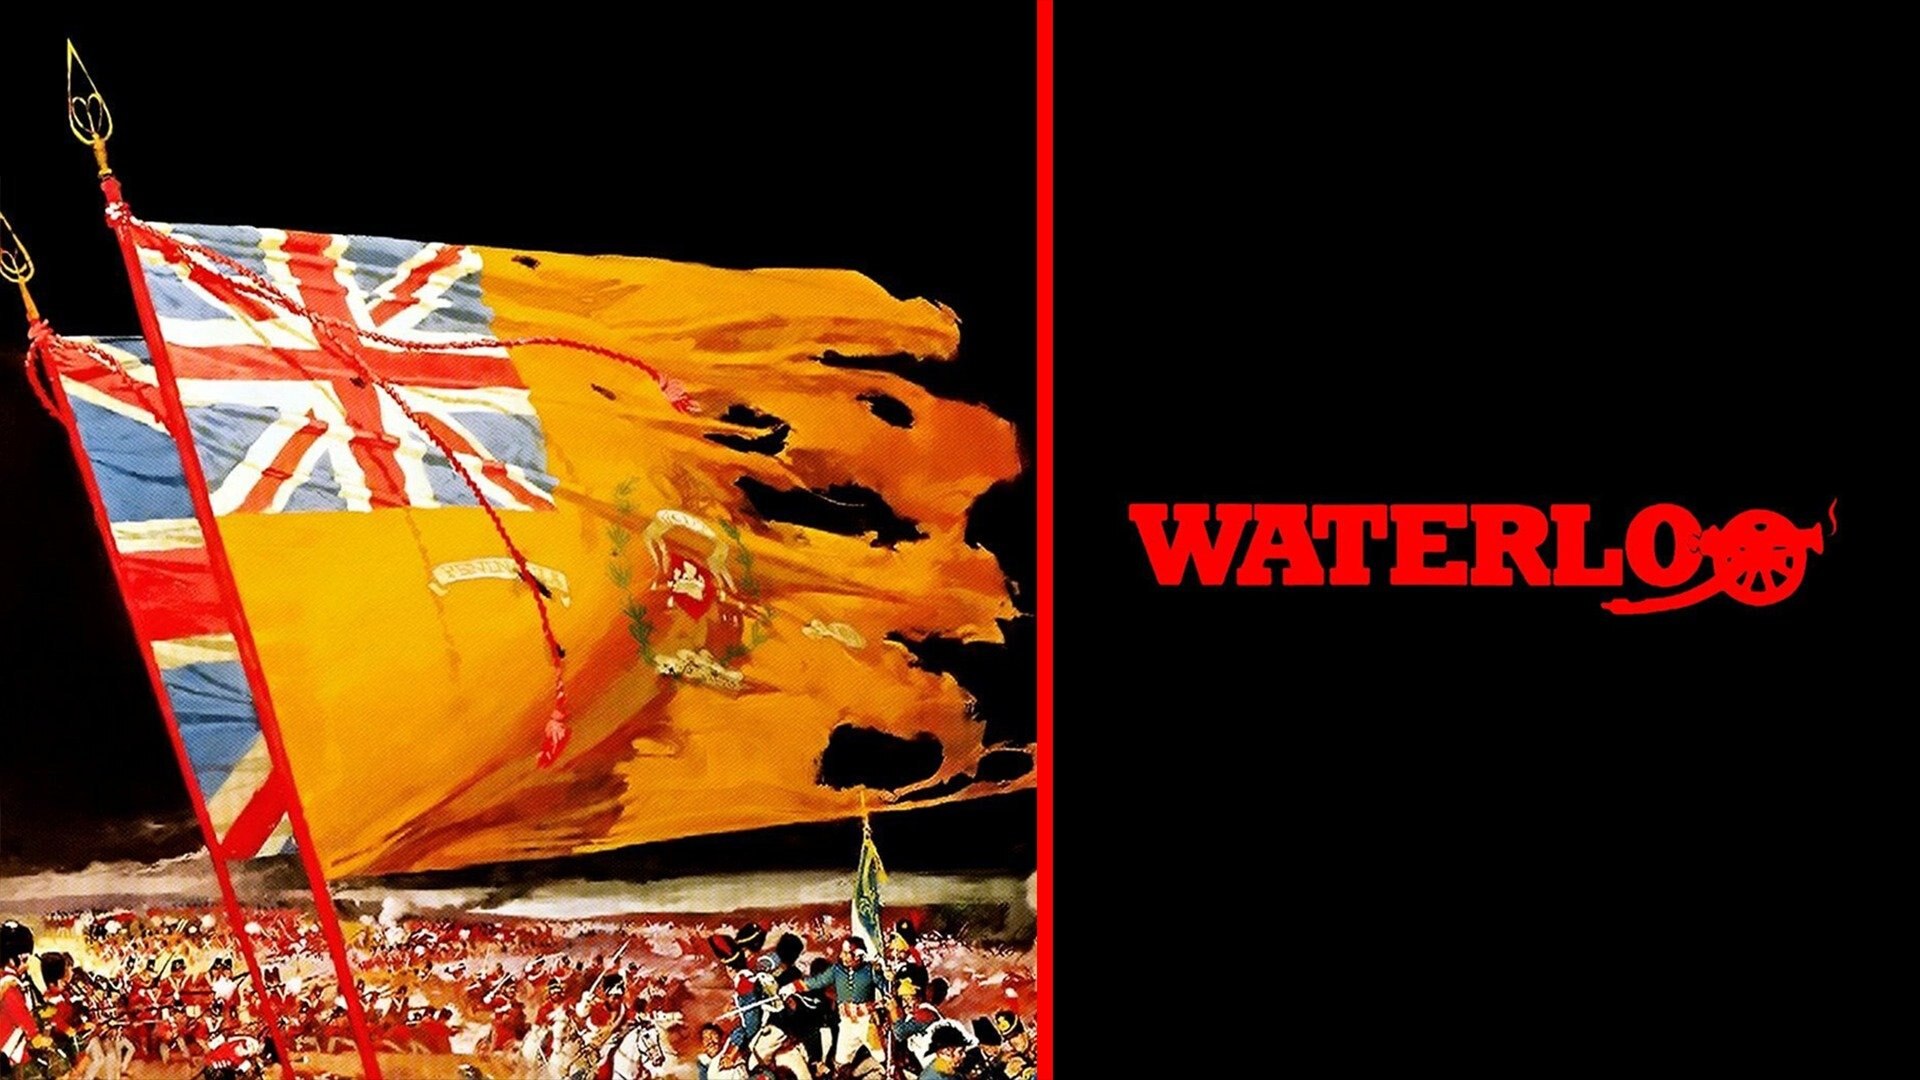 42-facts-about-the-movie-waterloo